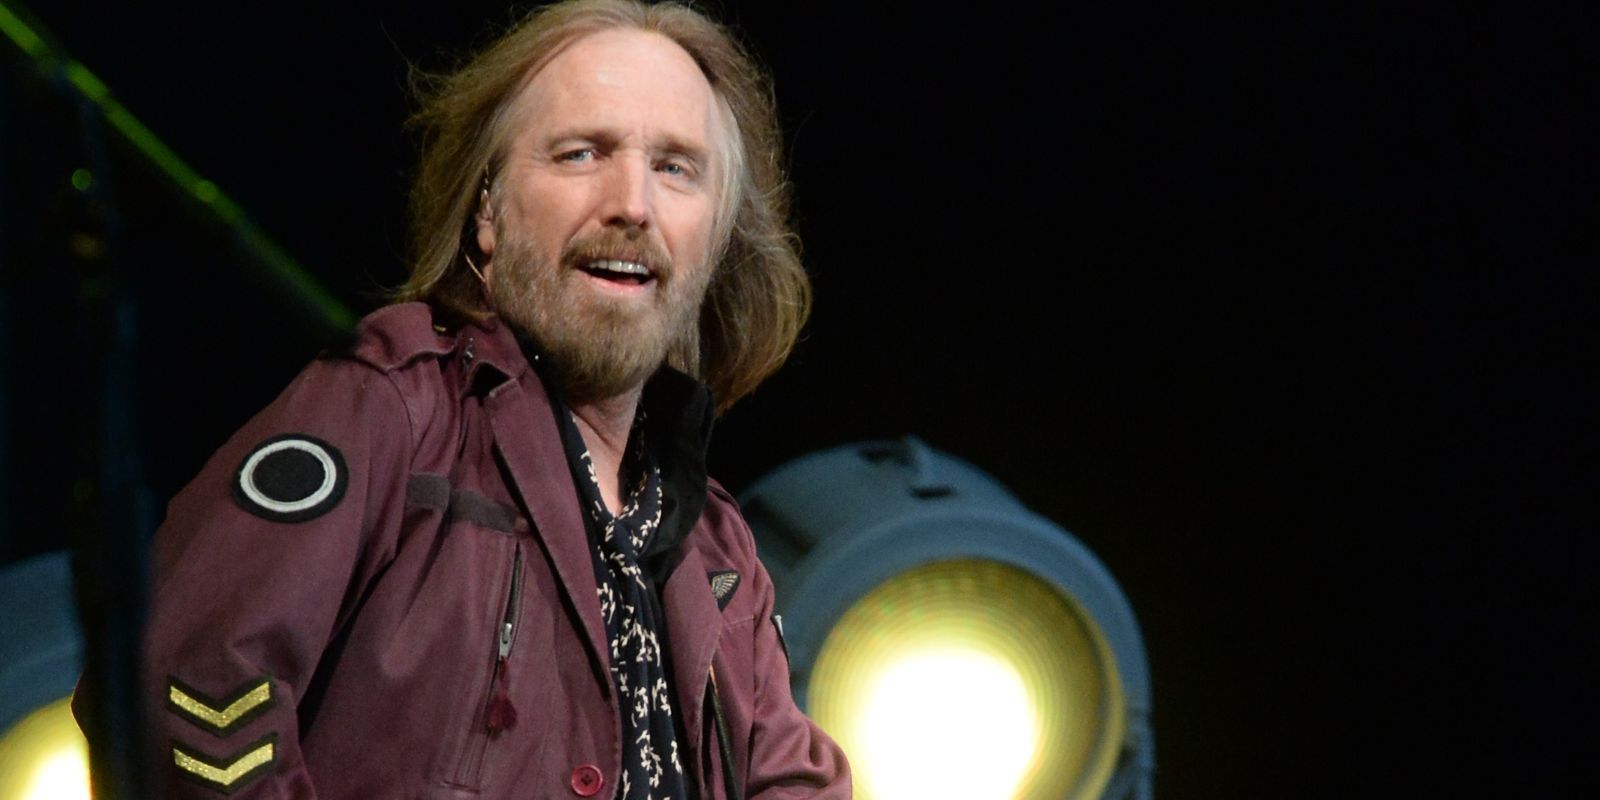 Rockers react to sad news about Tom Petty’s death